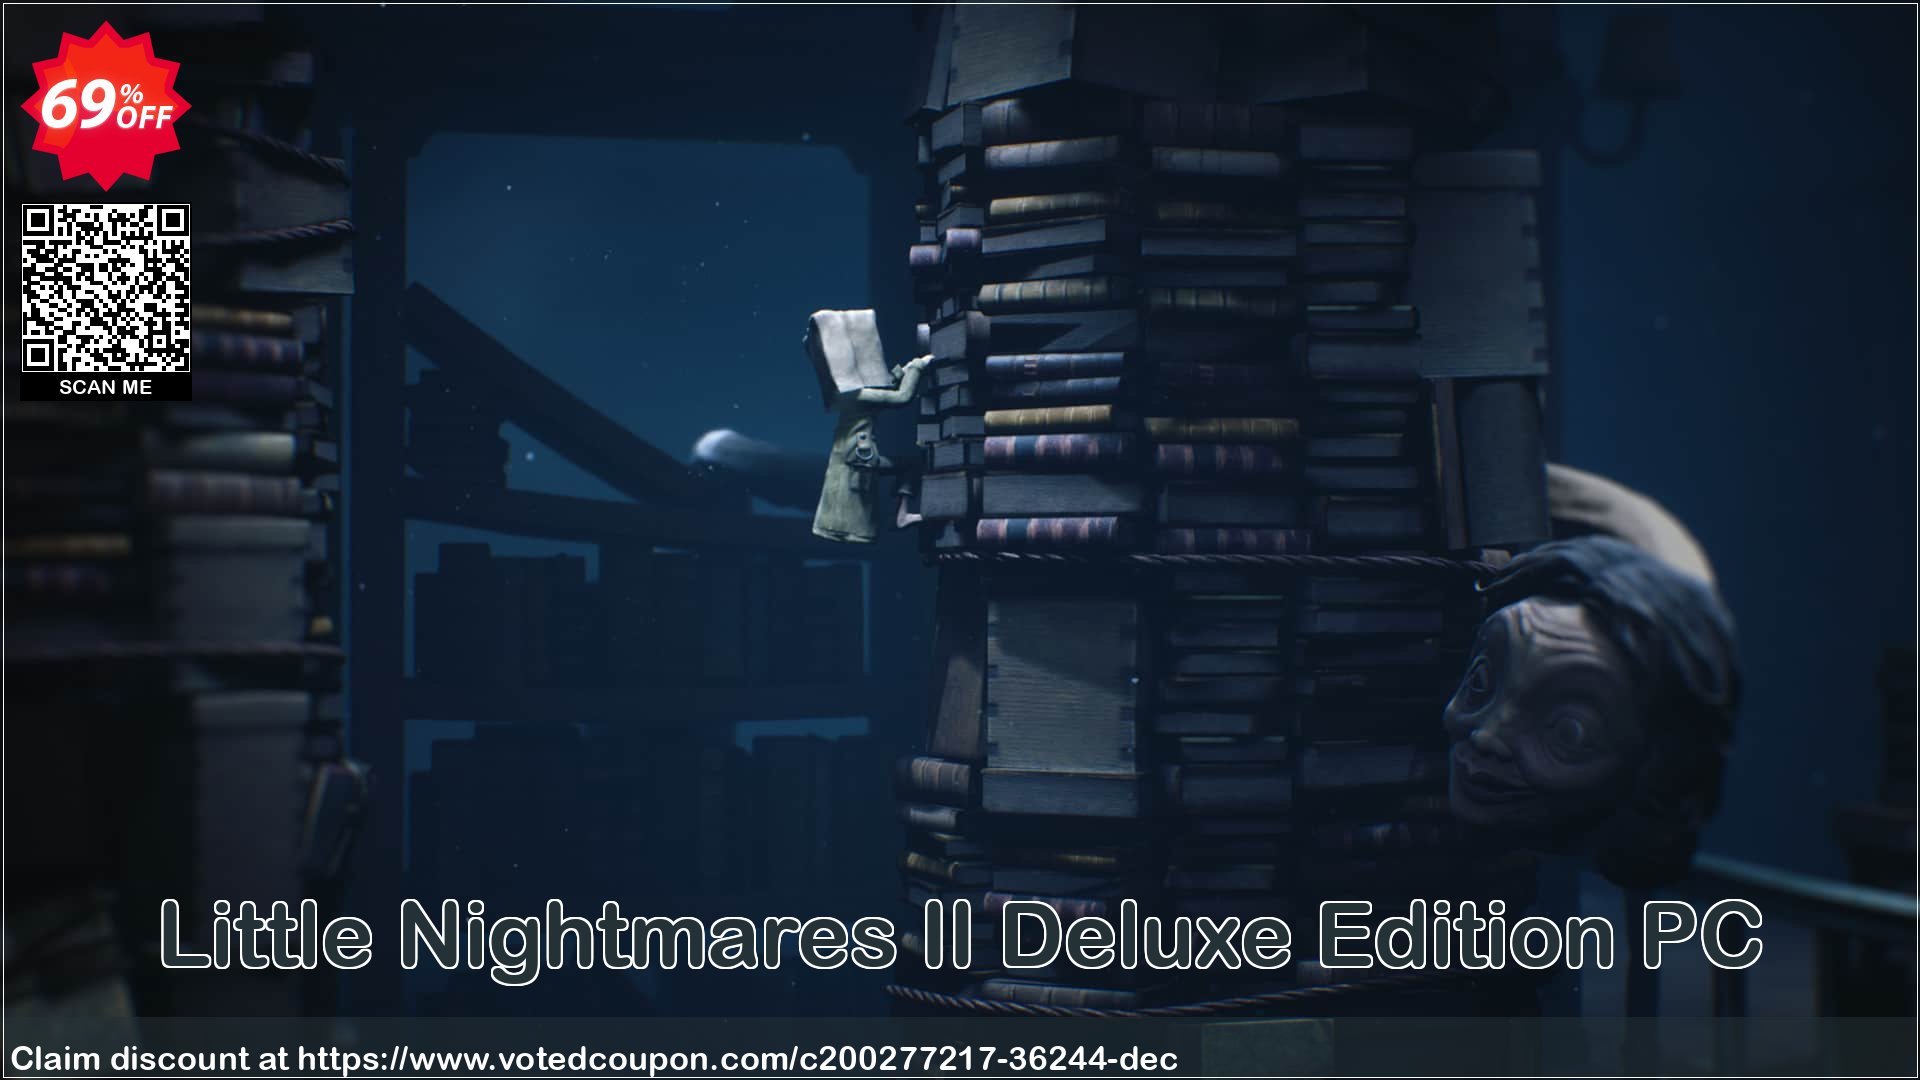 Little Nightmares II Deluxe Edition PC Coupon Code Apr 2024, 69% OFF - VotedCoupon